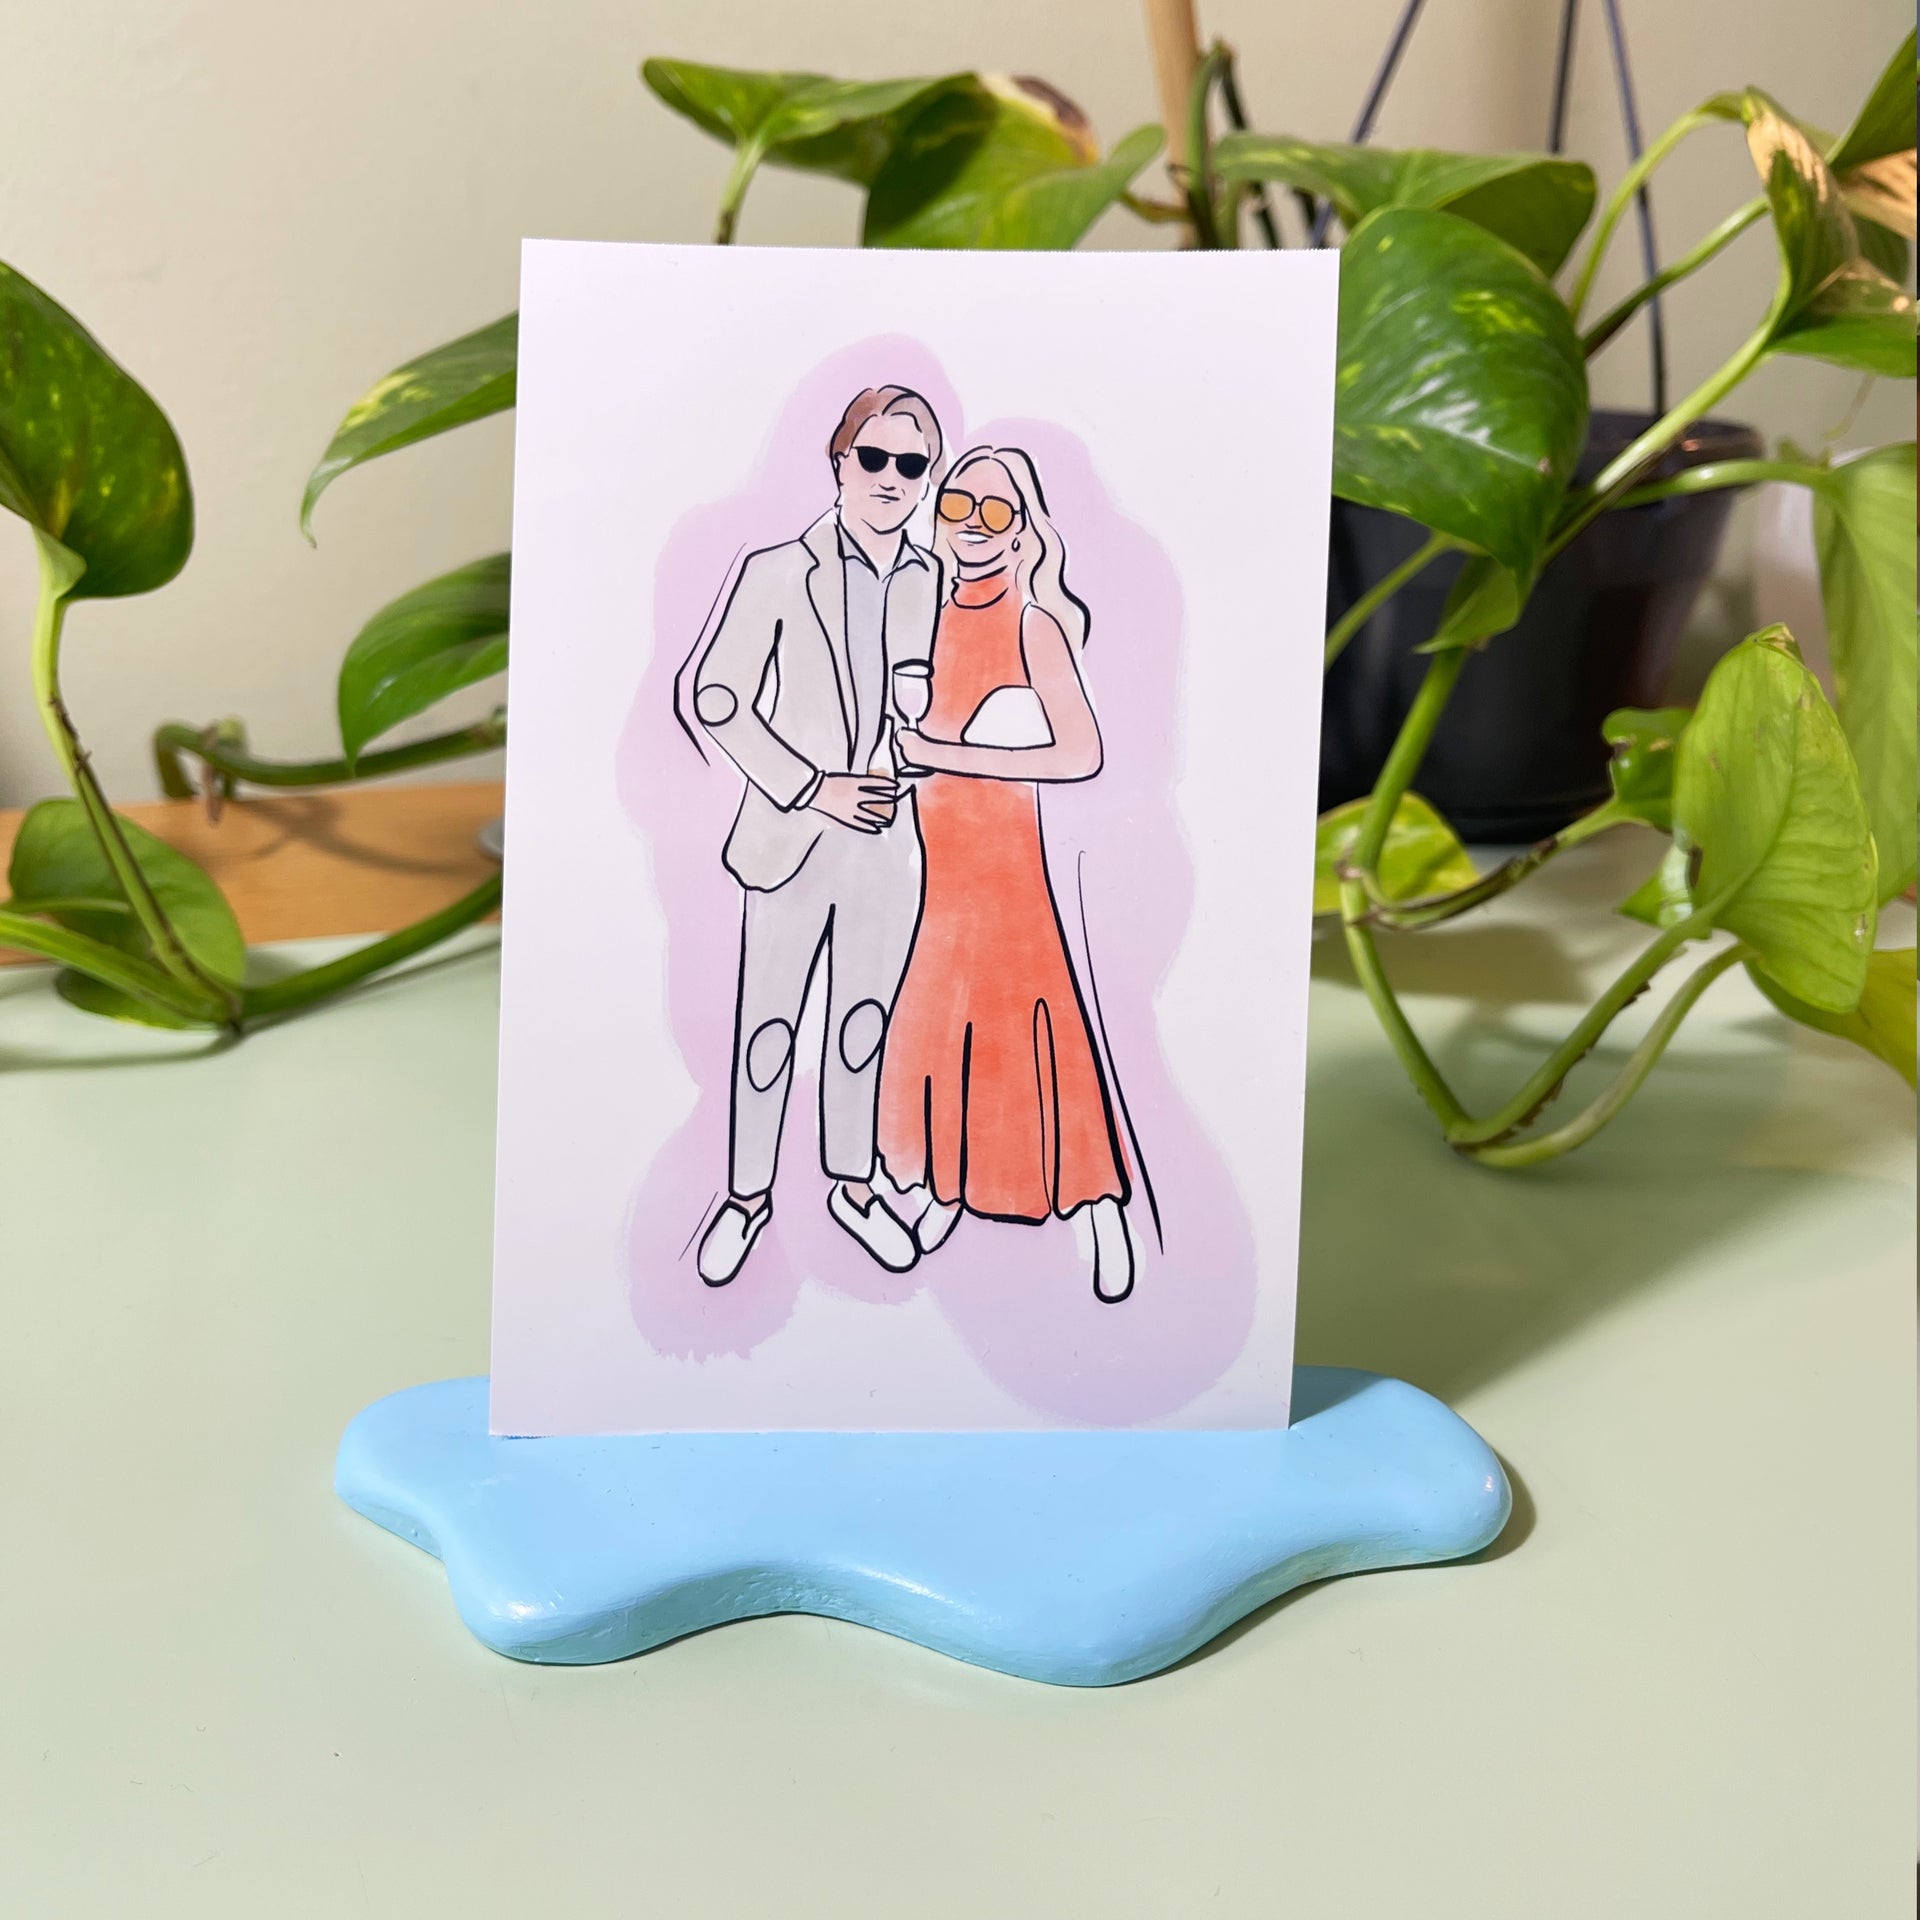 Handcrafted Photo Stand / Polaroid Photo Stand / Handshaped From Clay /  Picture Holder / Modern Home Decor / Picture Stand / Unique Gift 